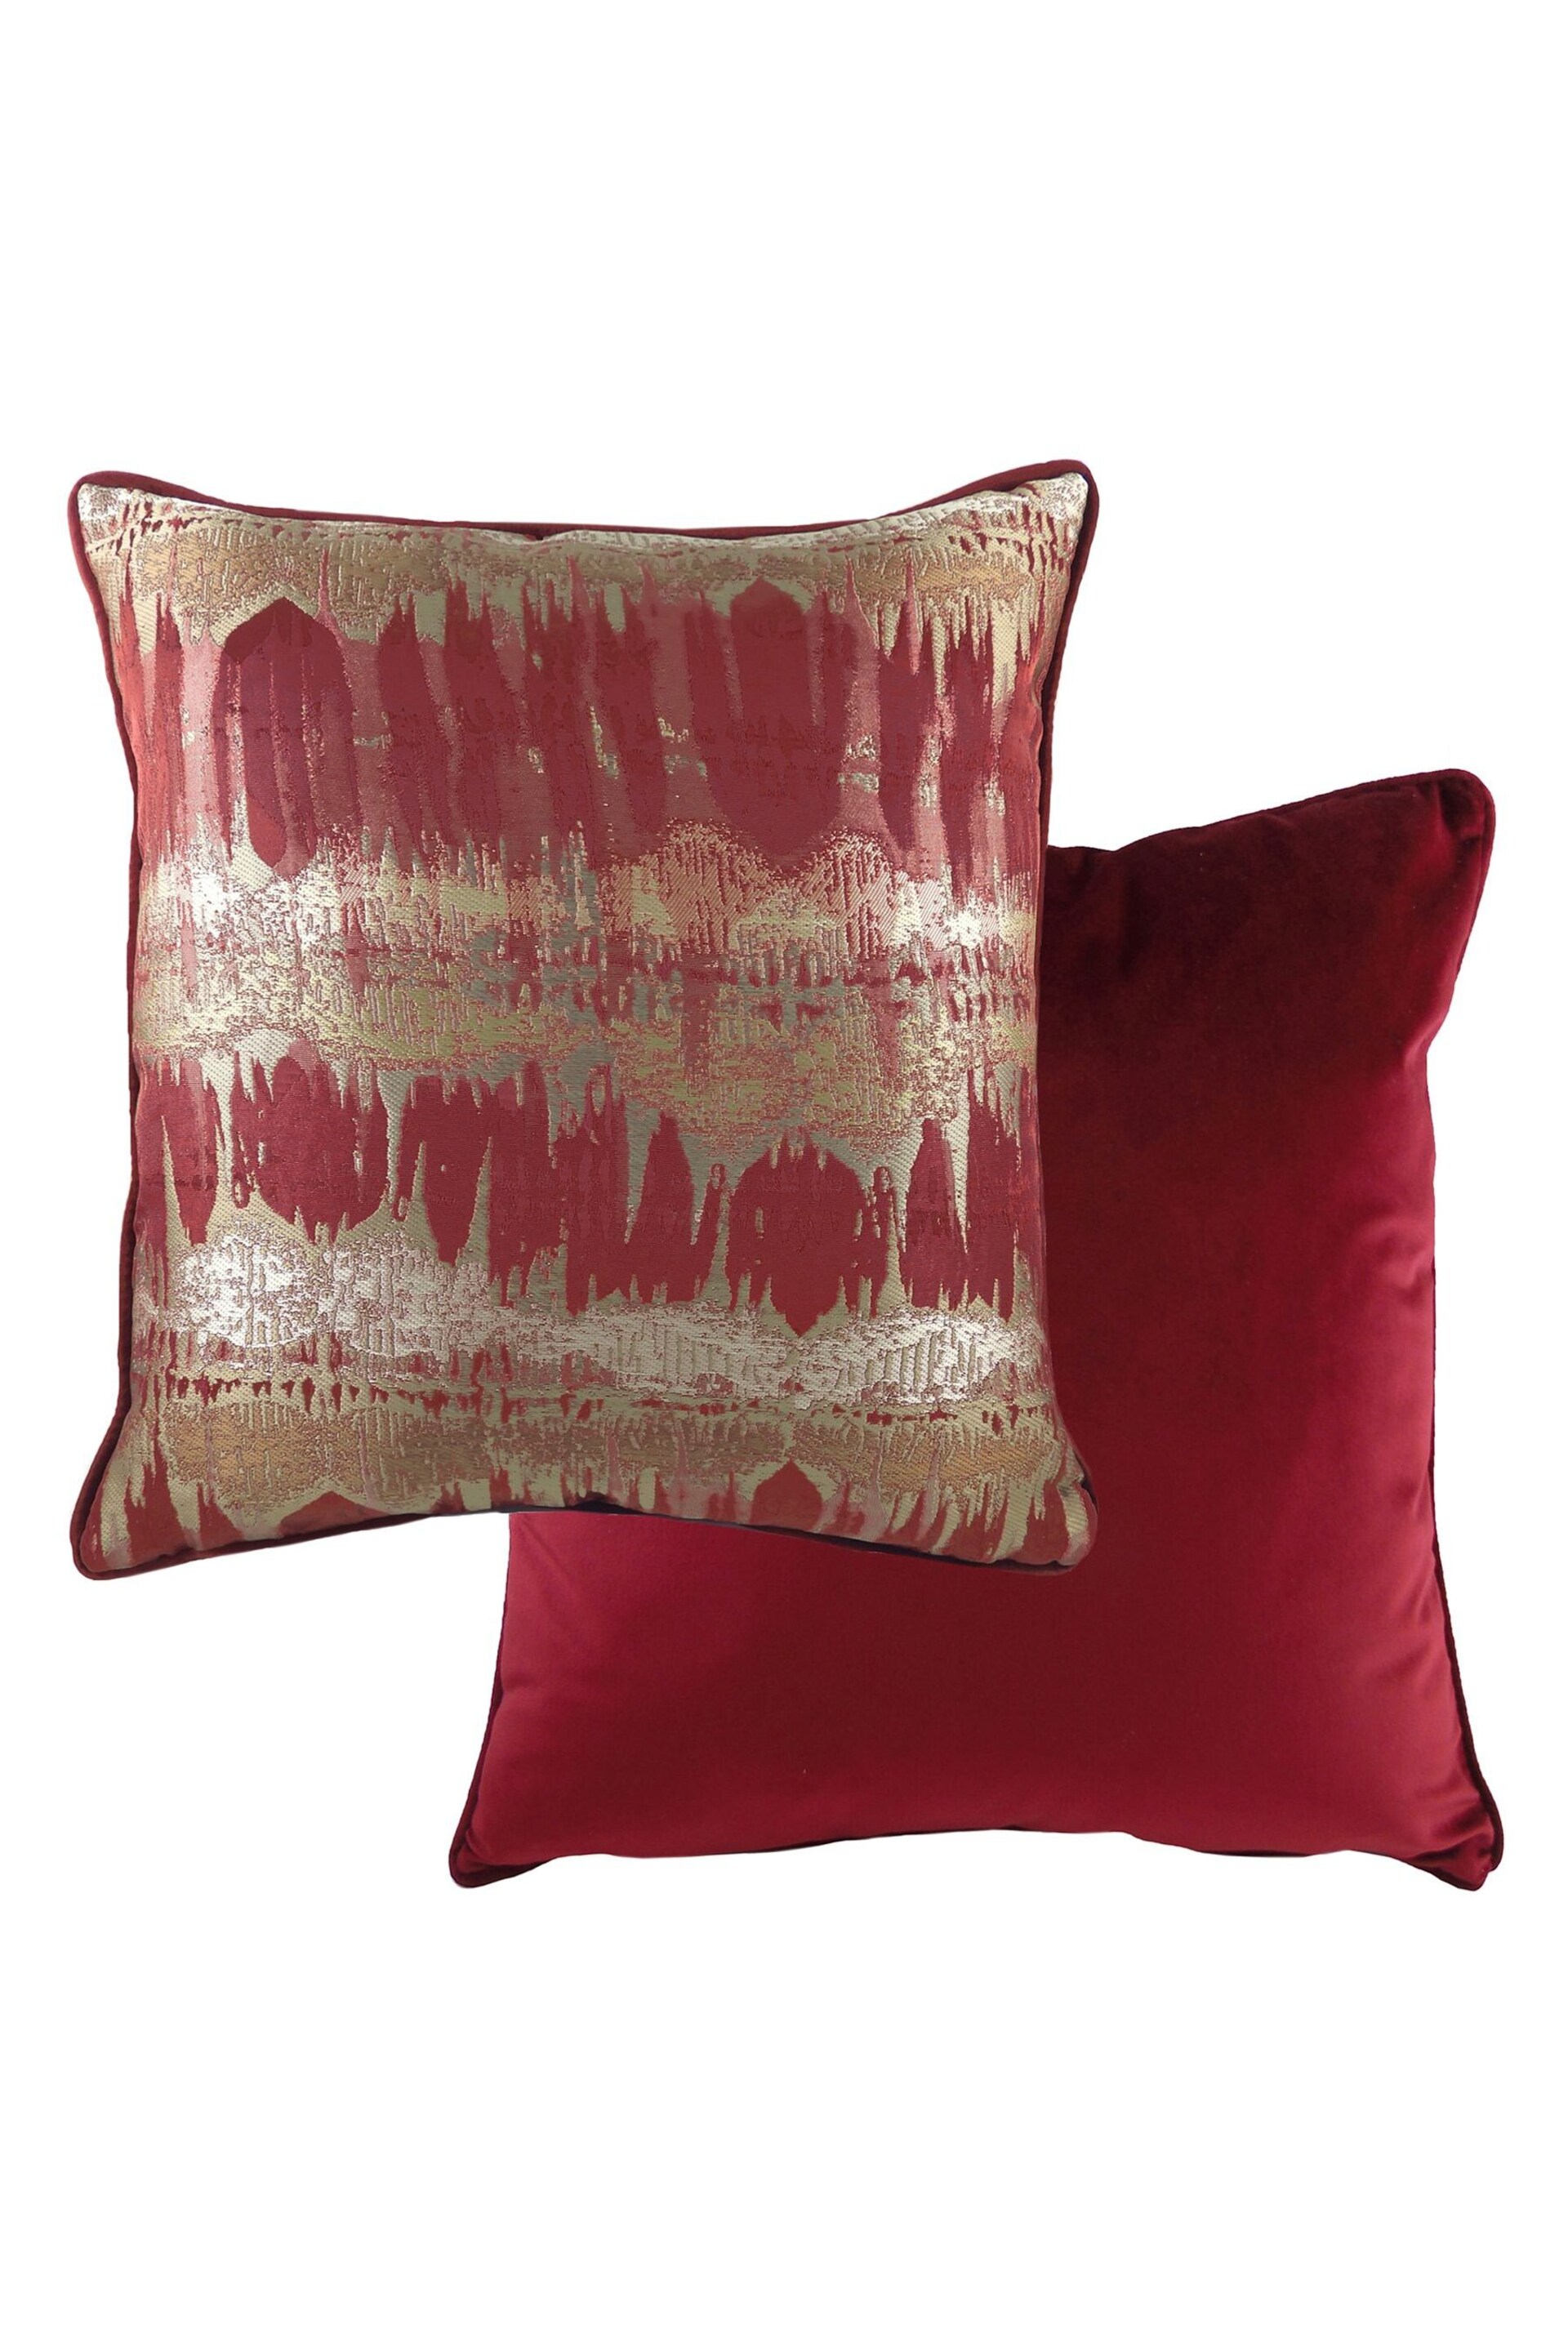 Evans Lichfield Burgundy Red Inca Jacquard Polyester Filled Cushion - Image 1 of 2